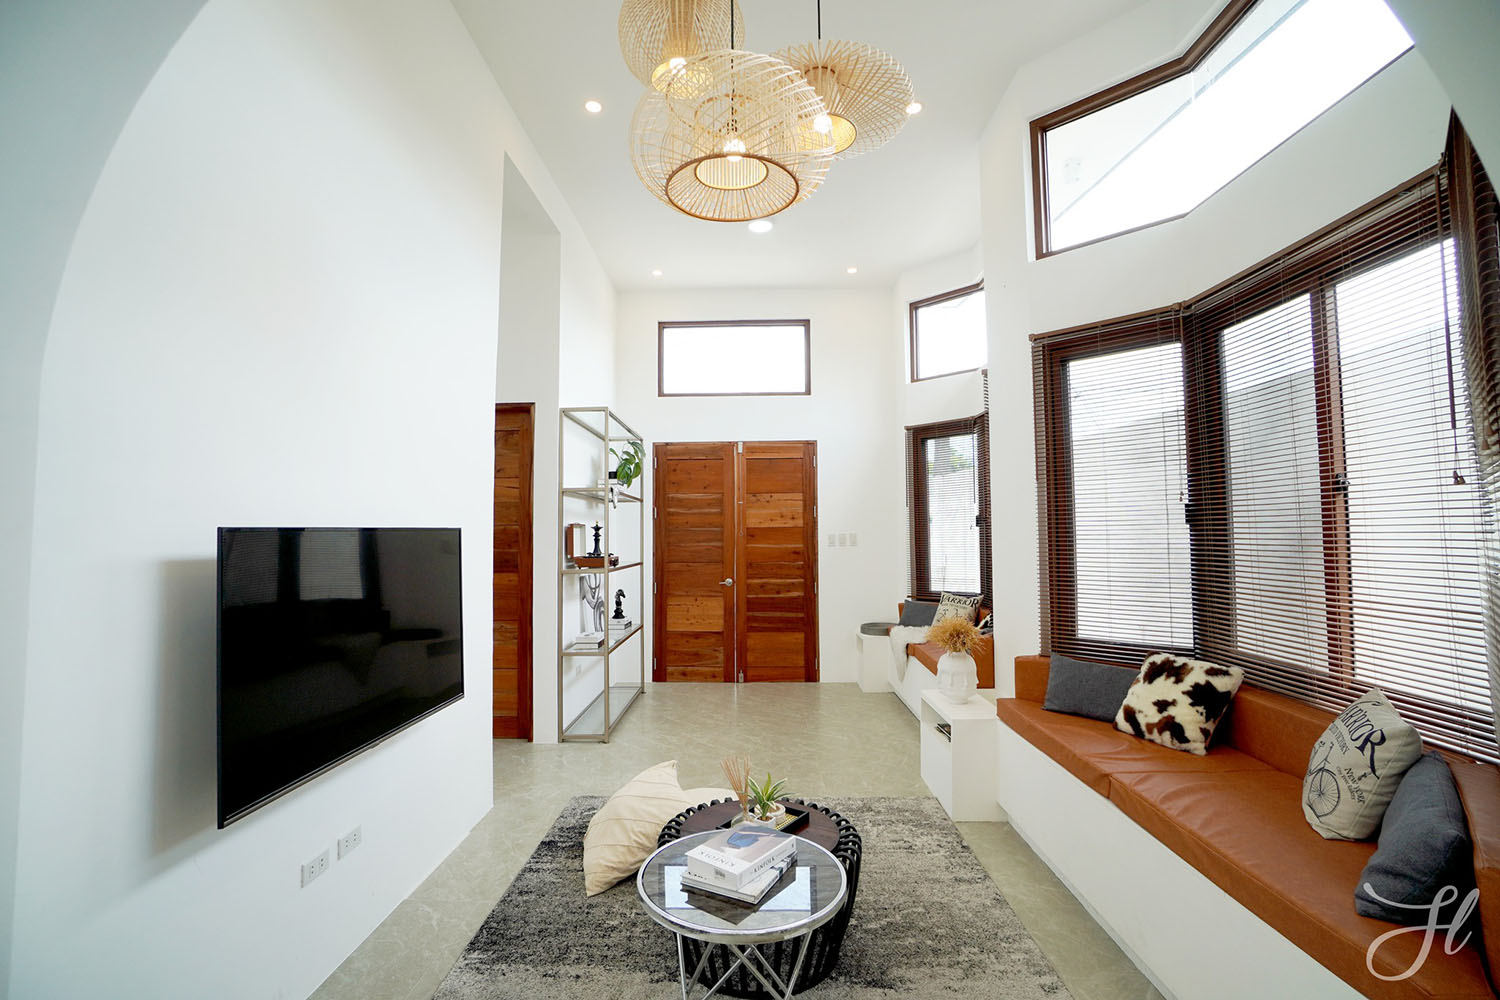 high ceilings complete this bungalow